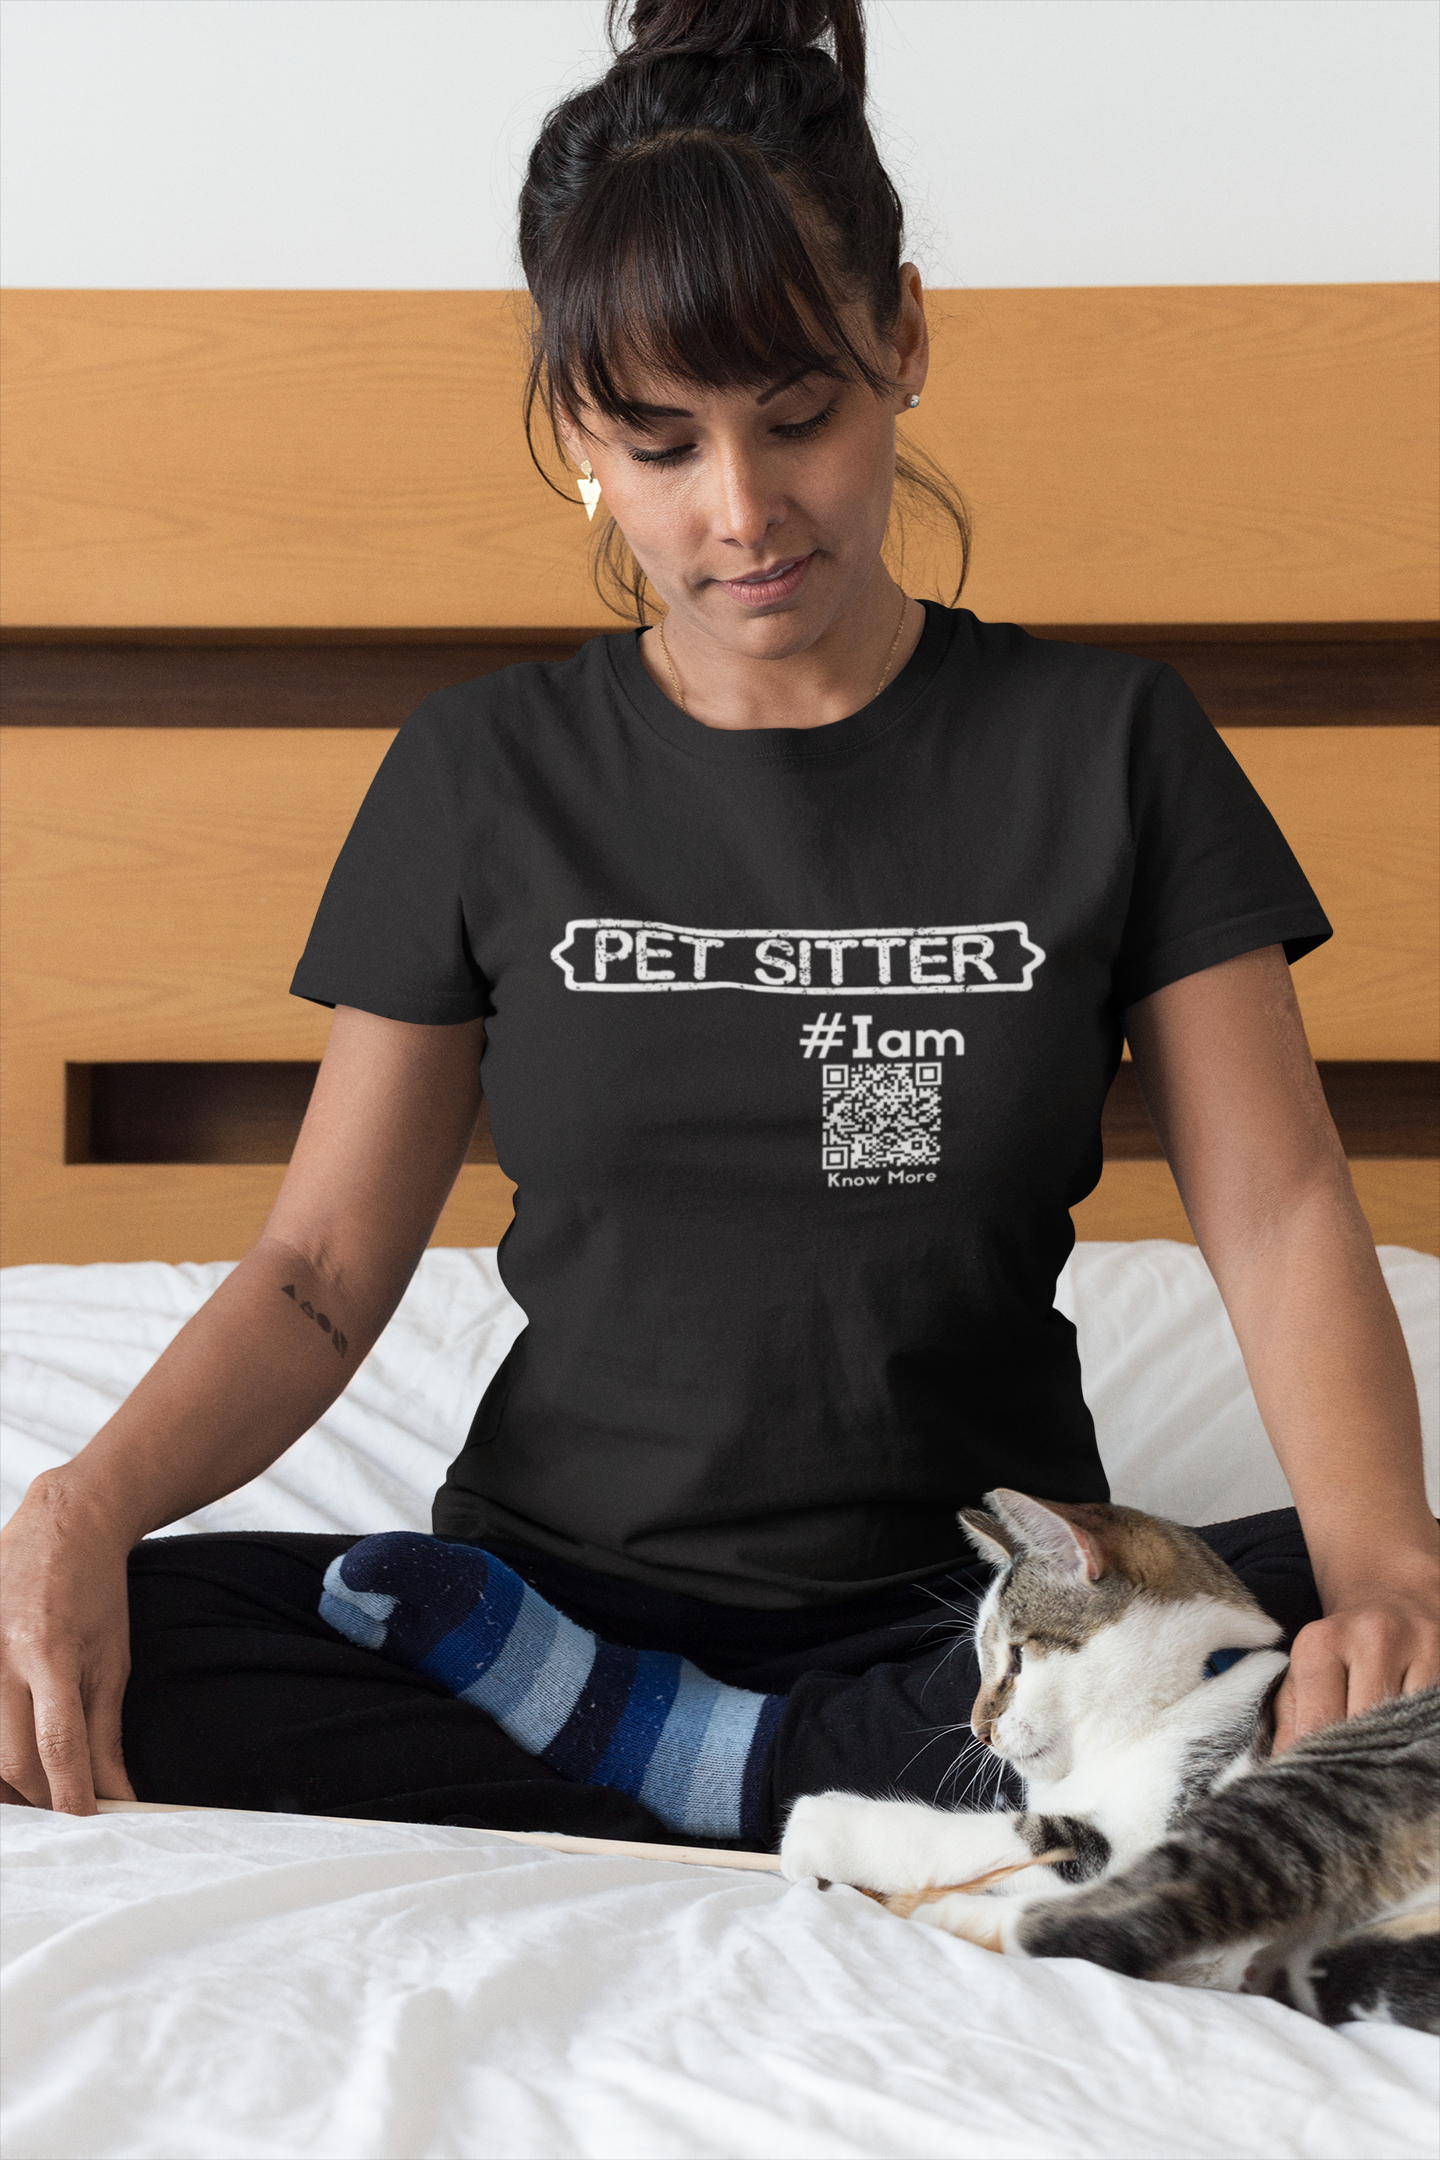 A female presenting person is sitting on a comfy looking bed with a cat. She is wearing a black CLAIM It Tee™ with a CLAIM™ that reads {PET SITTER} #Iam. The QRcode with the Share Space™ is visible. 